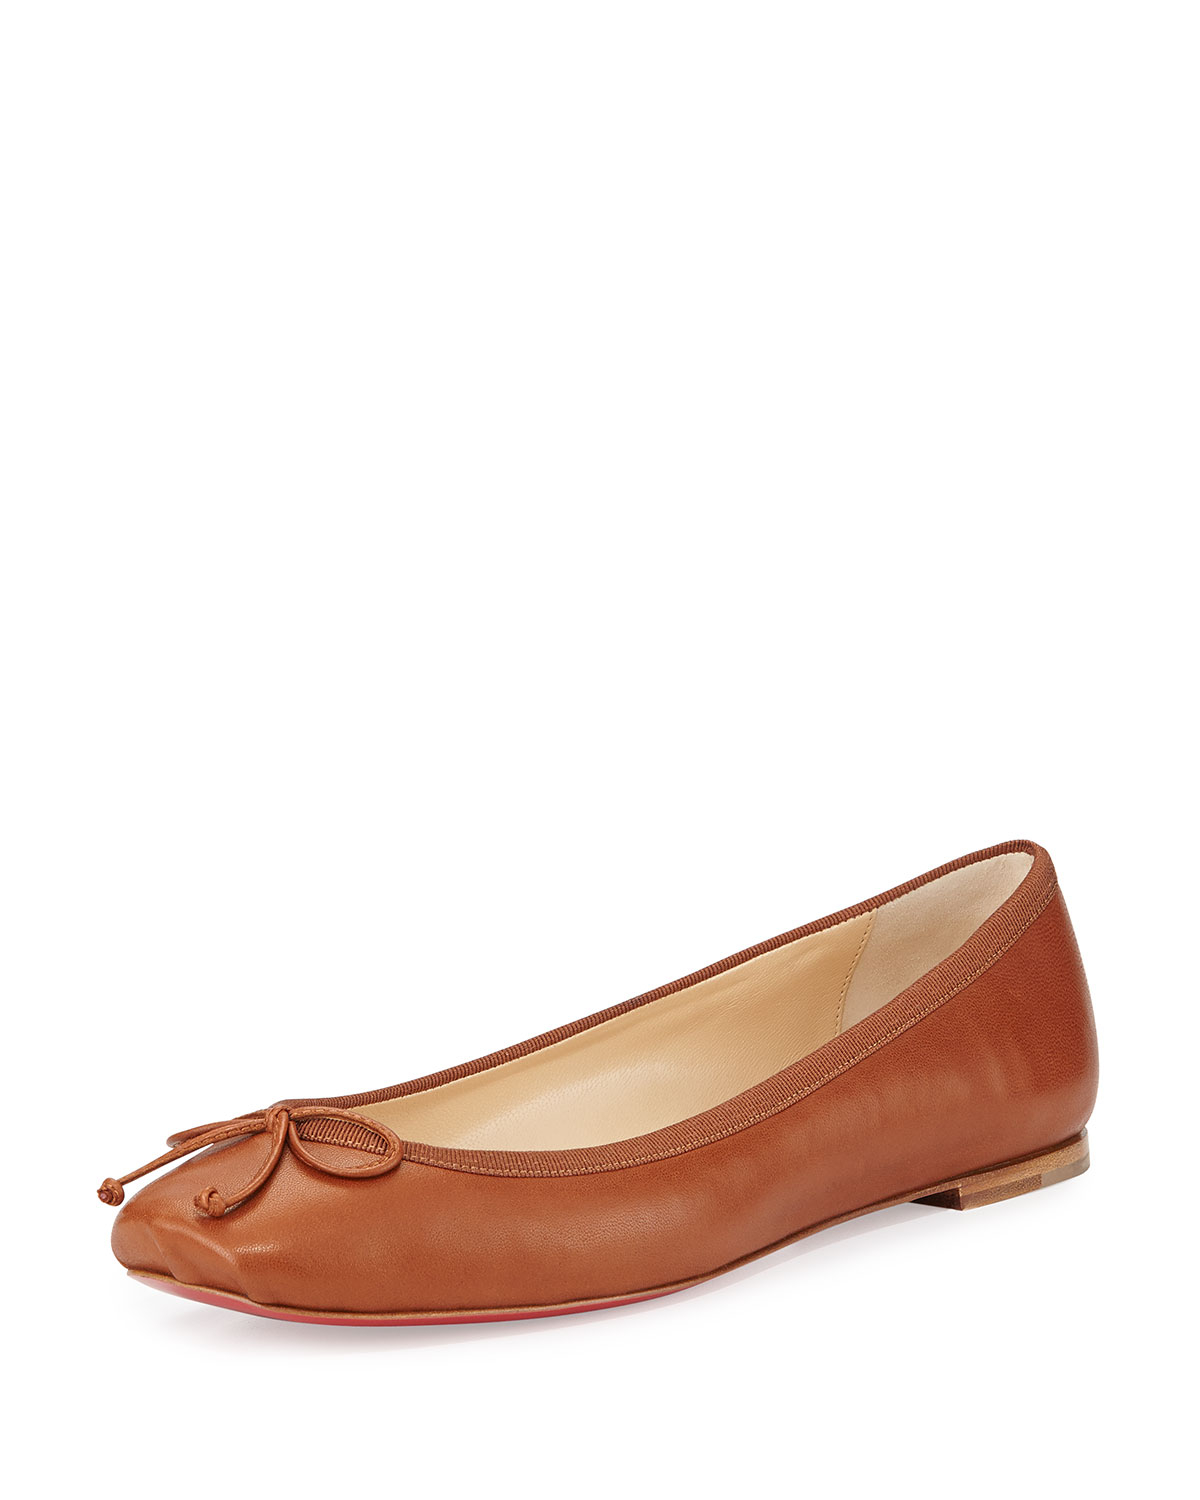 christian louboutin flats Brown leather bow detail | The Filipino ...  